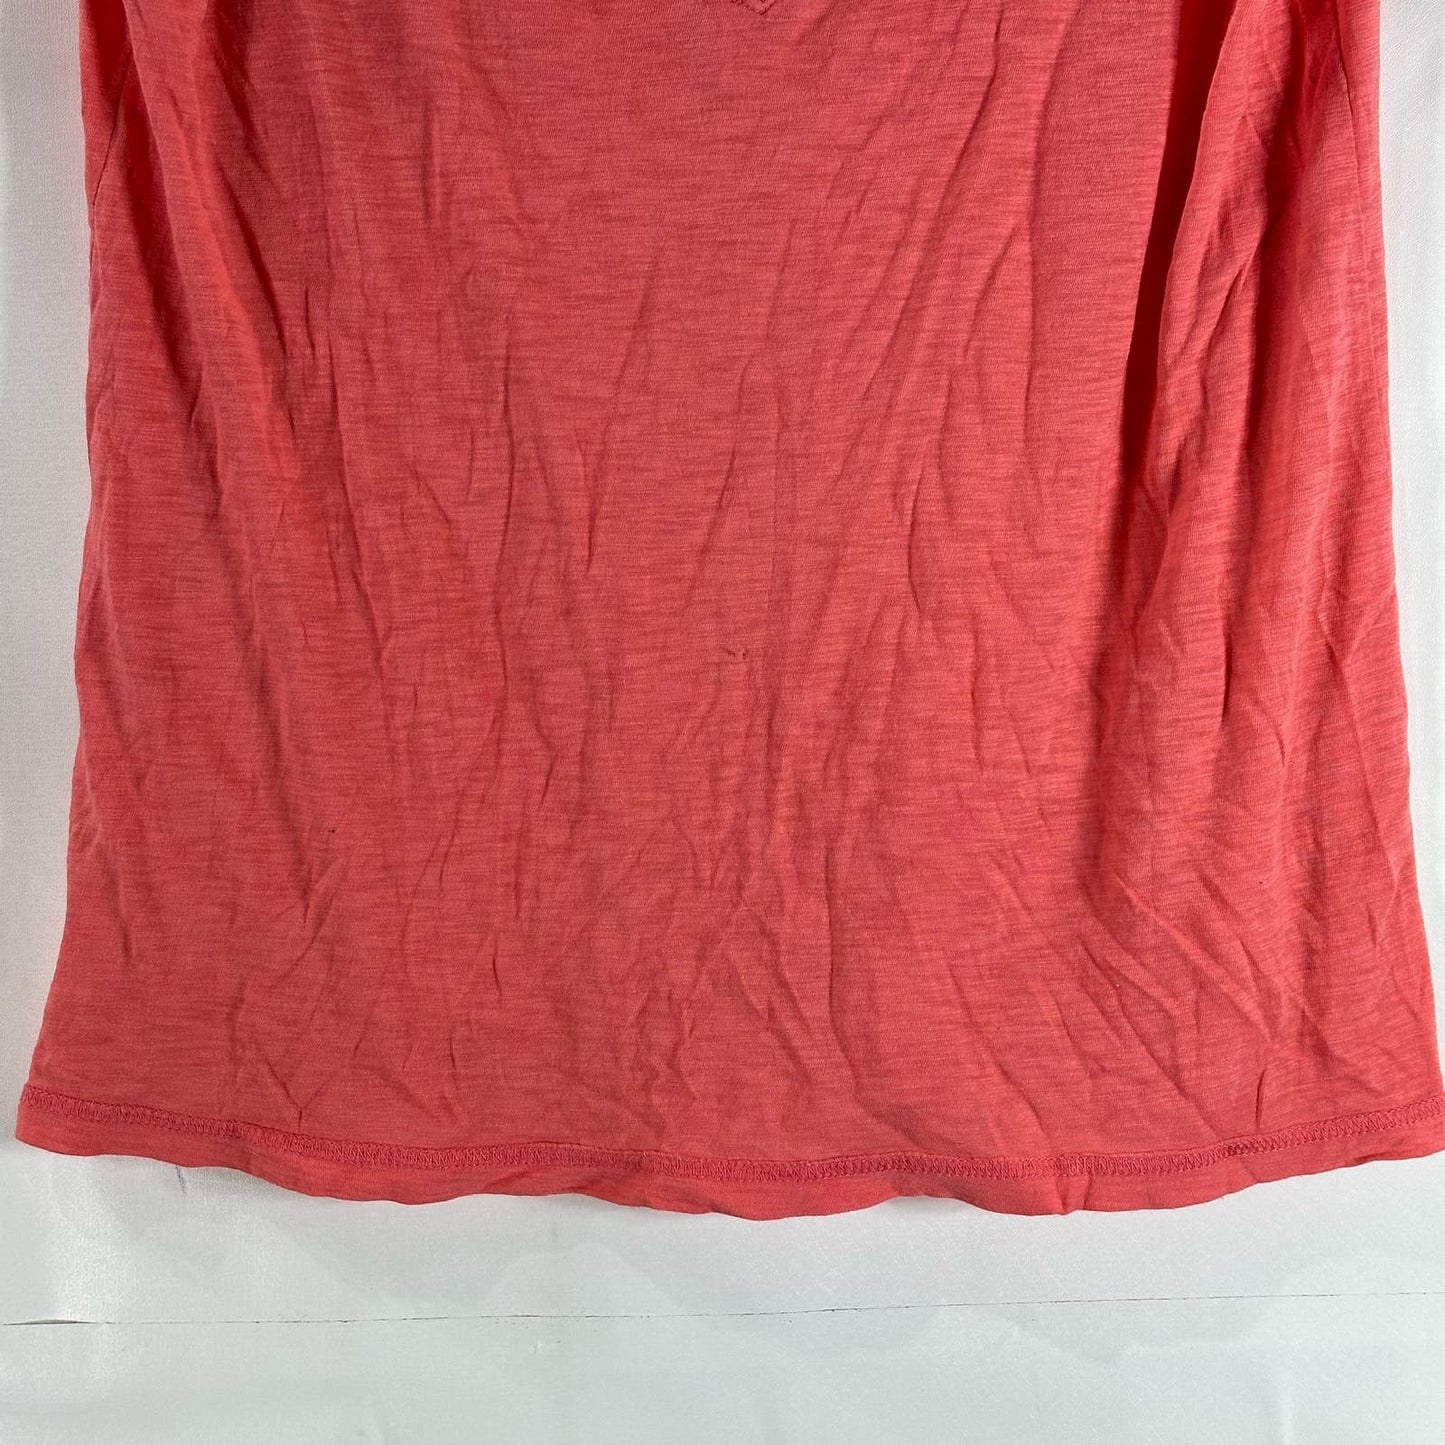 PAIGE Women's Pink Deep V-Neck Casual Short Sleeve Top SZ S